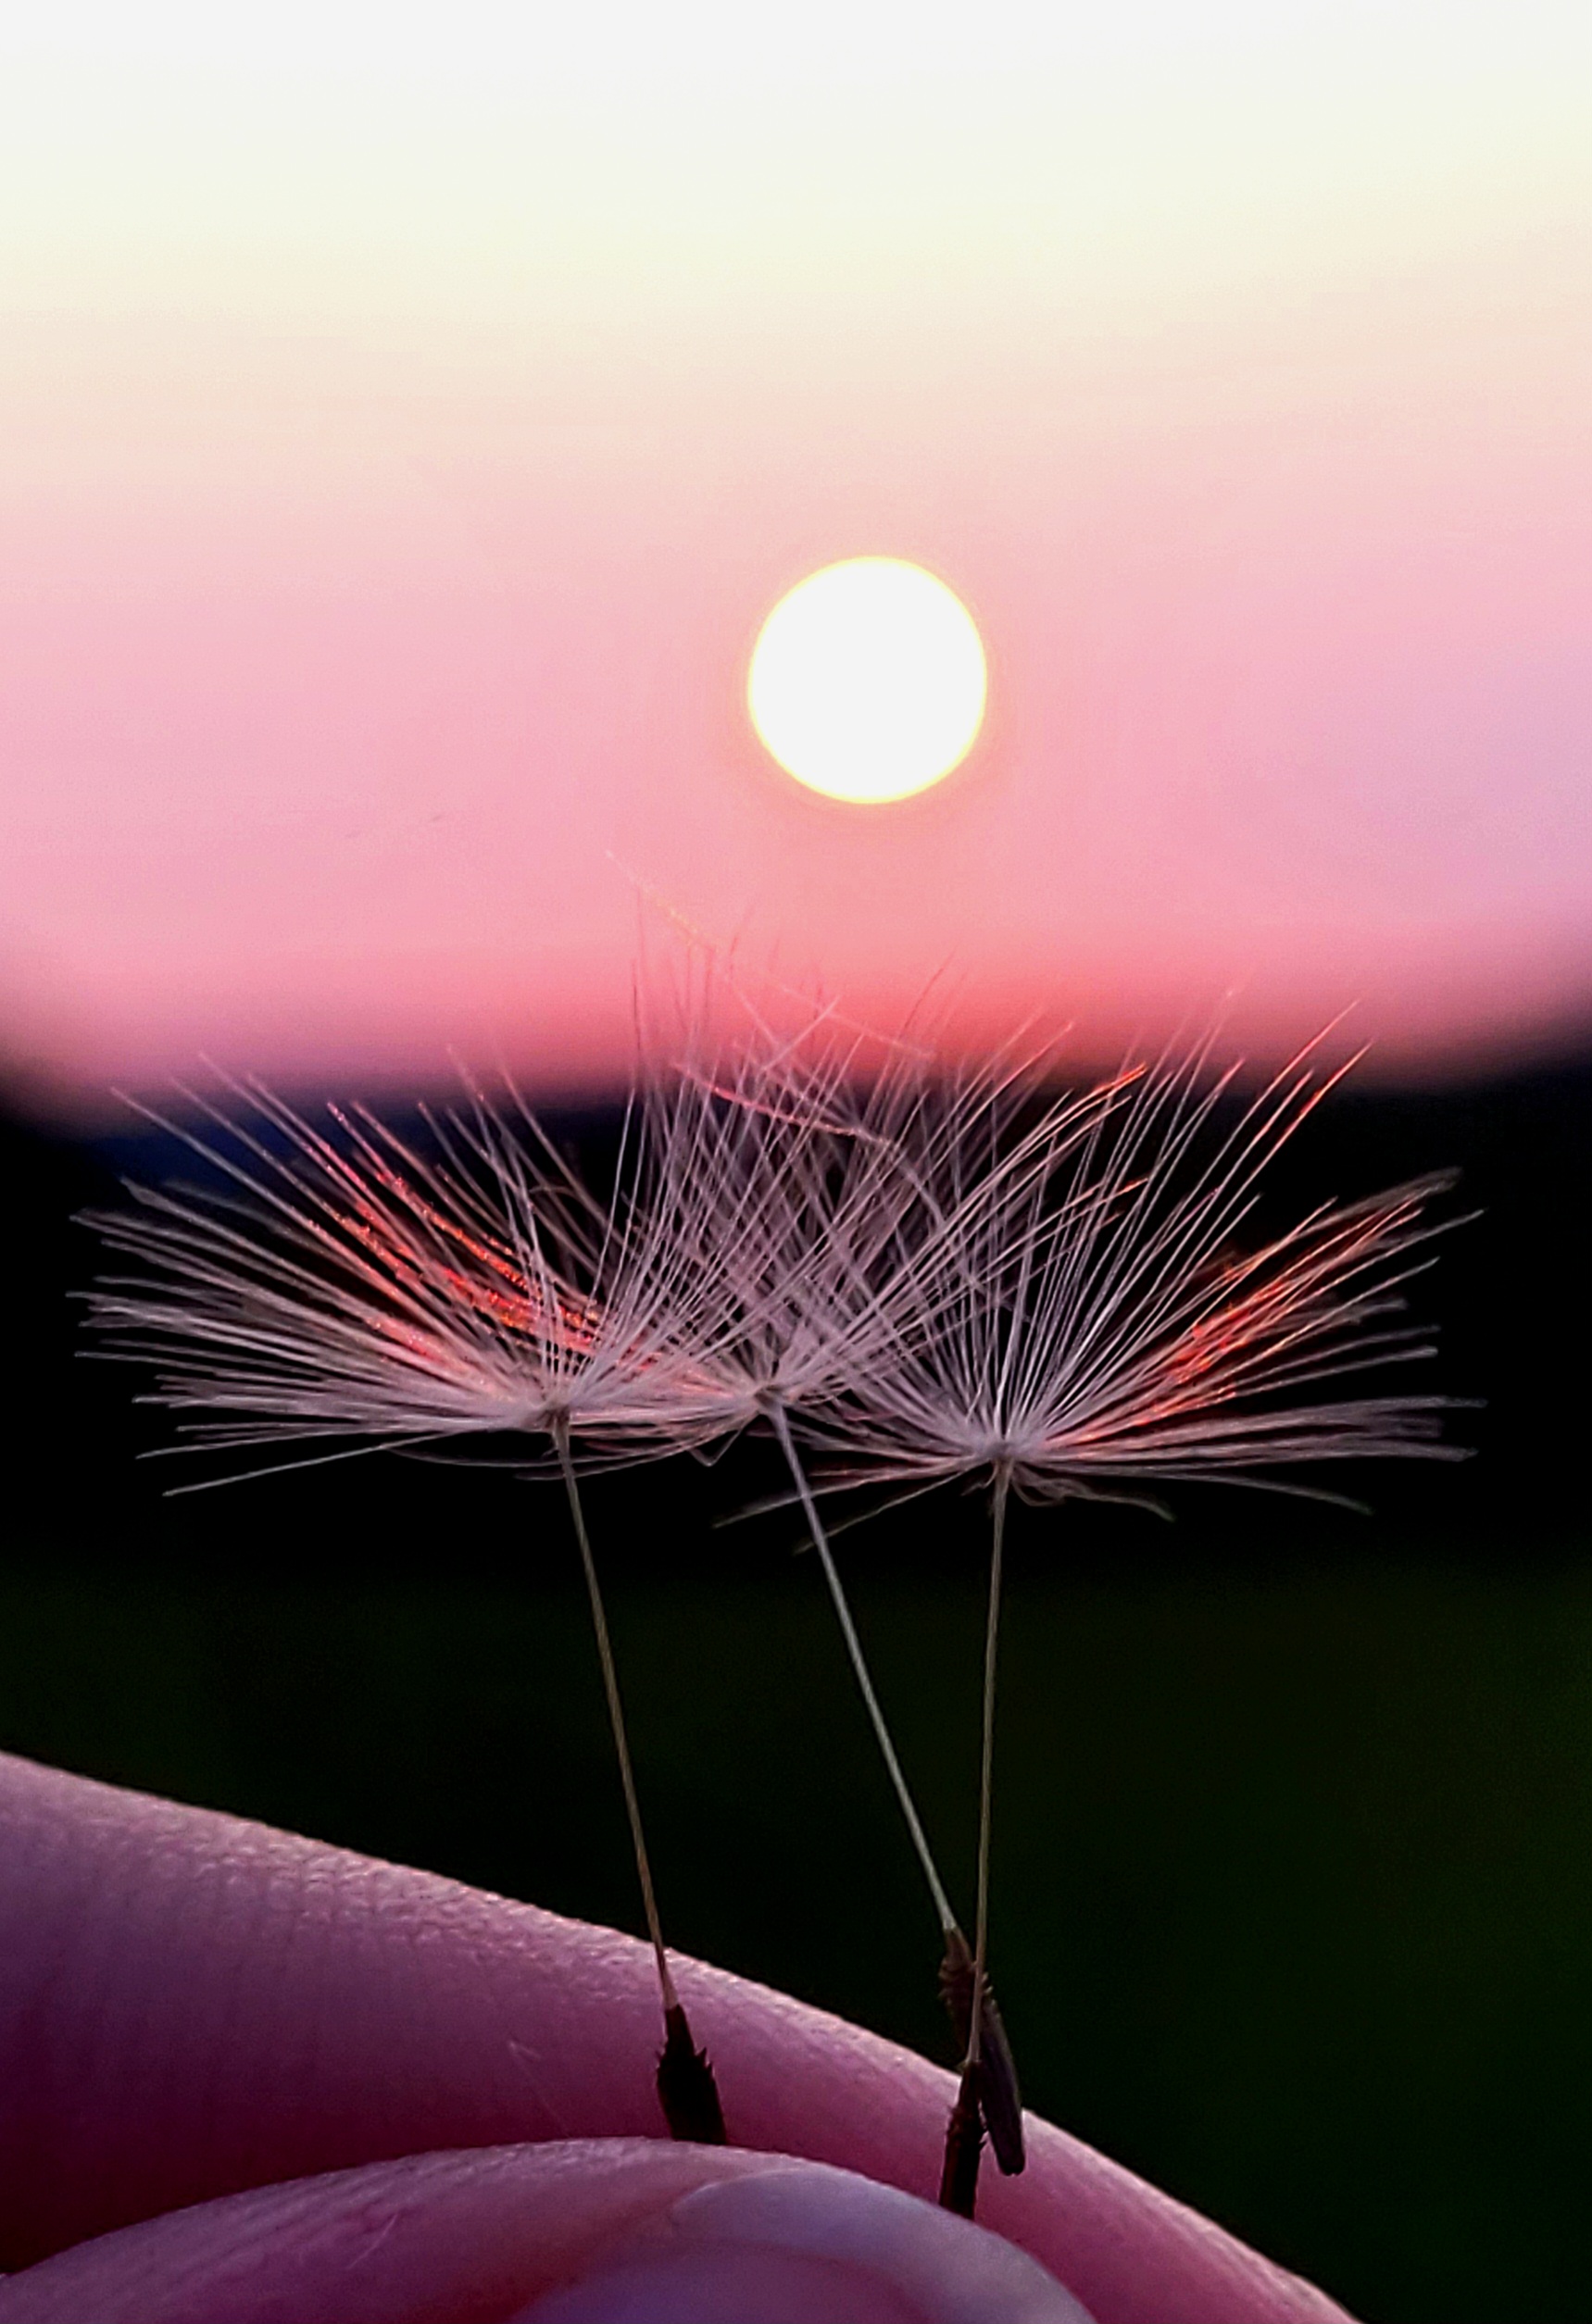 cambria stanton picture of dandelion seeds by sunset